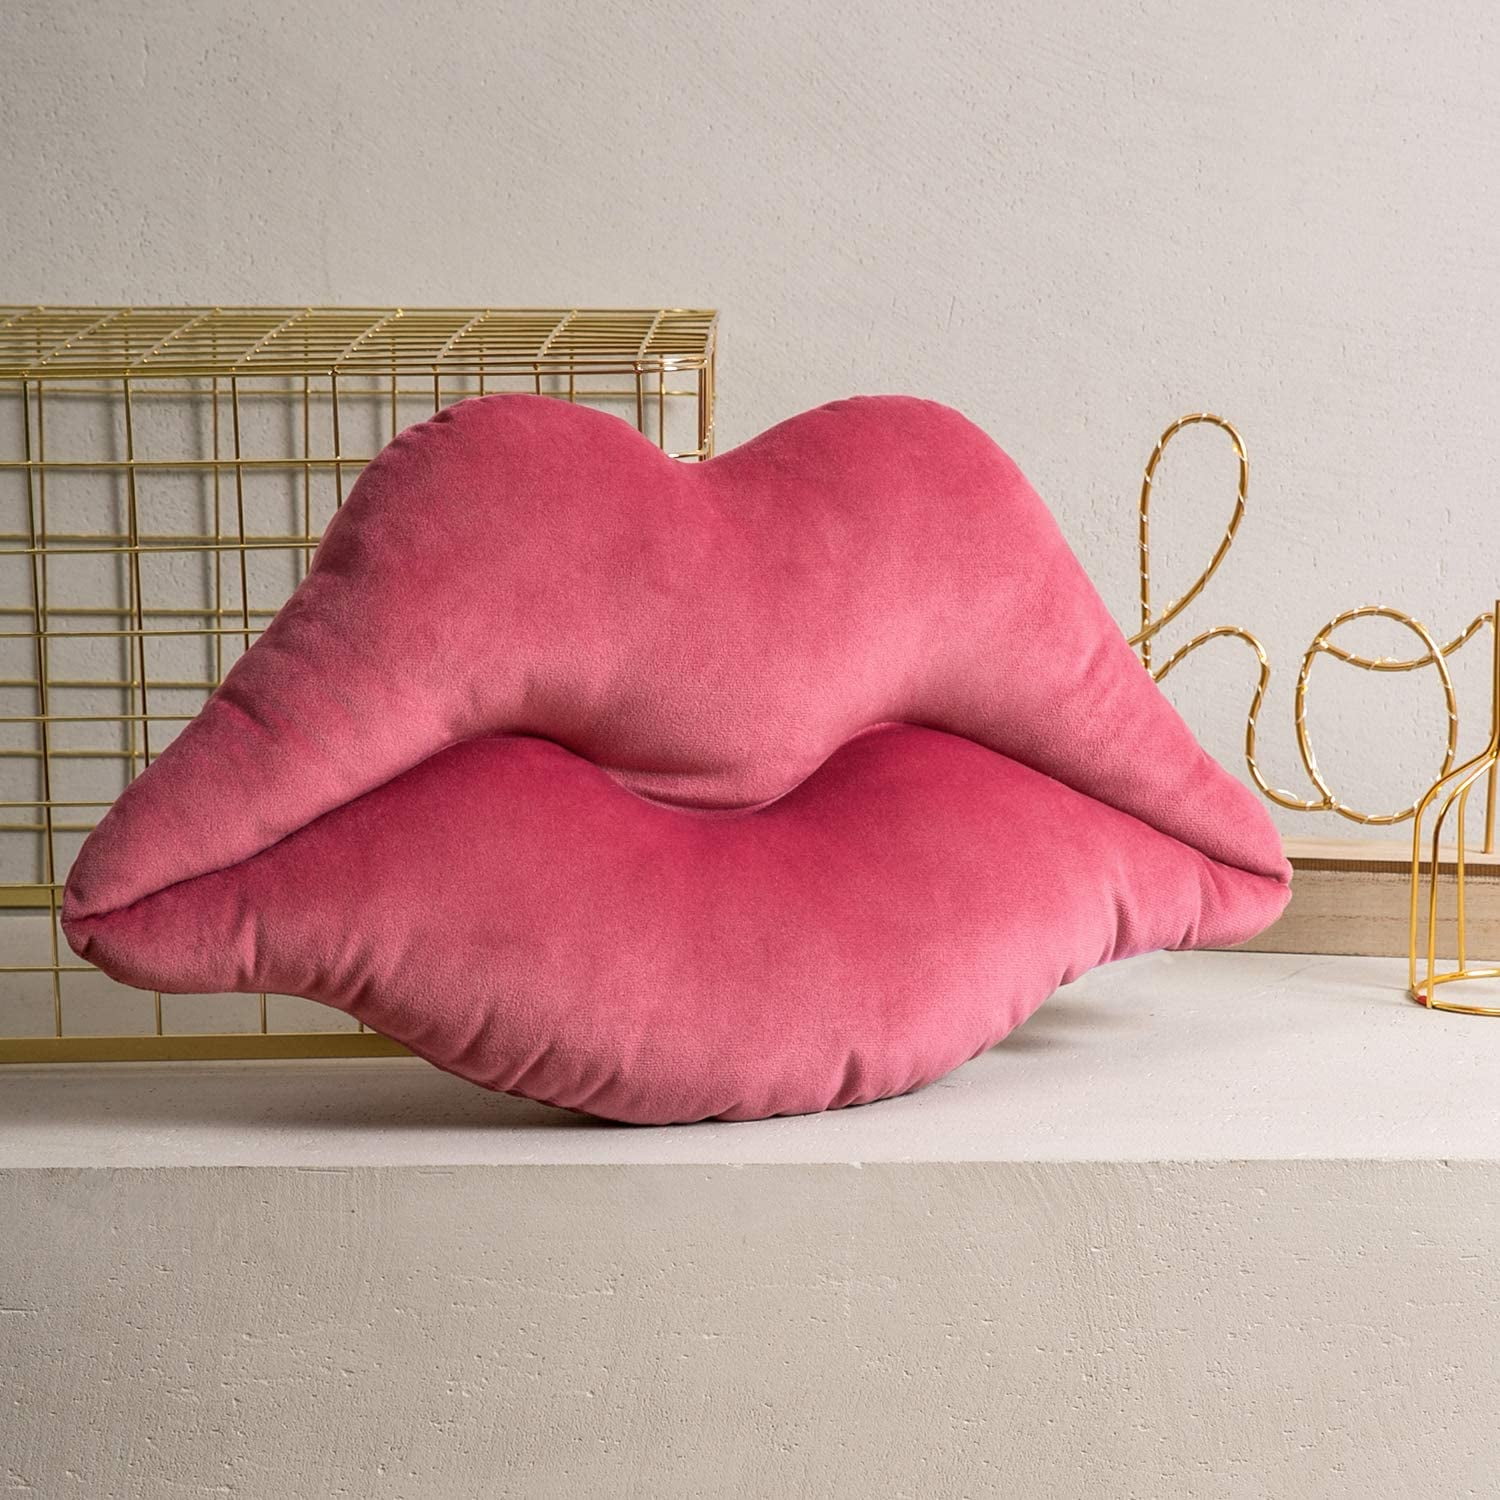 3D Lips Soft Velvet Cushion Throw Pillows for Couch Bed Living Room, Insert  Included, Dark Red, 20 X 11 inches 